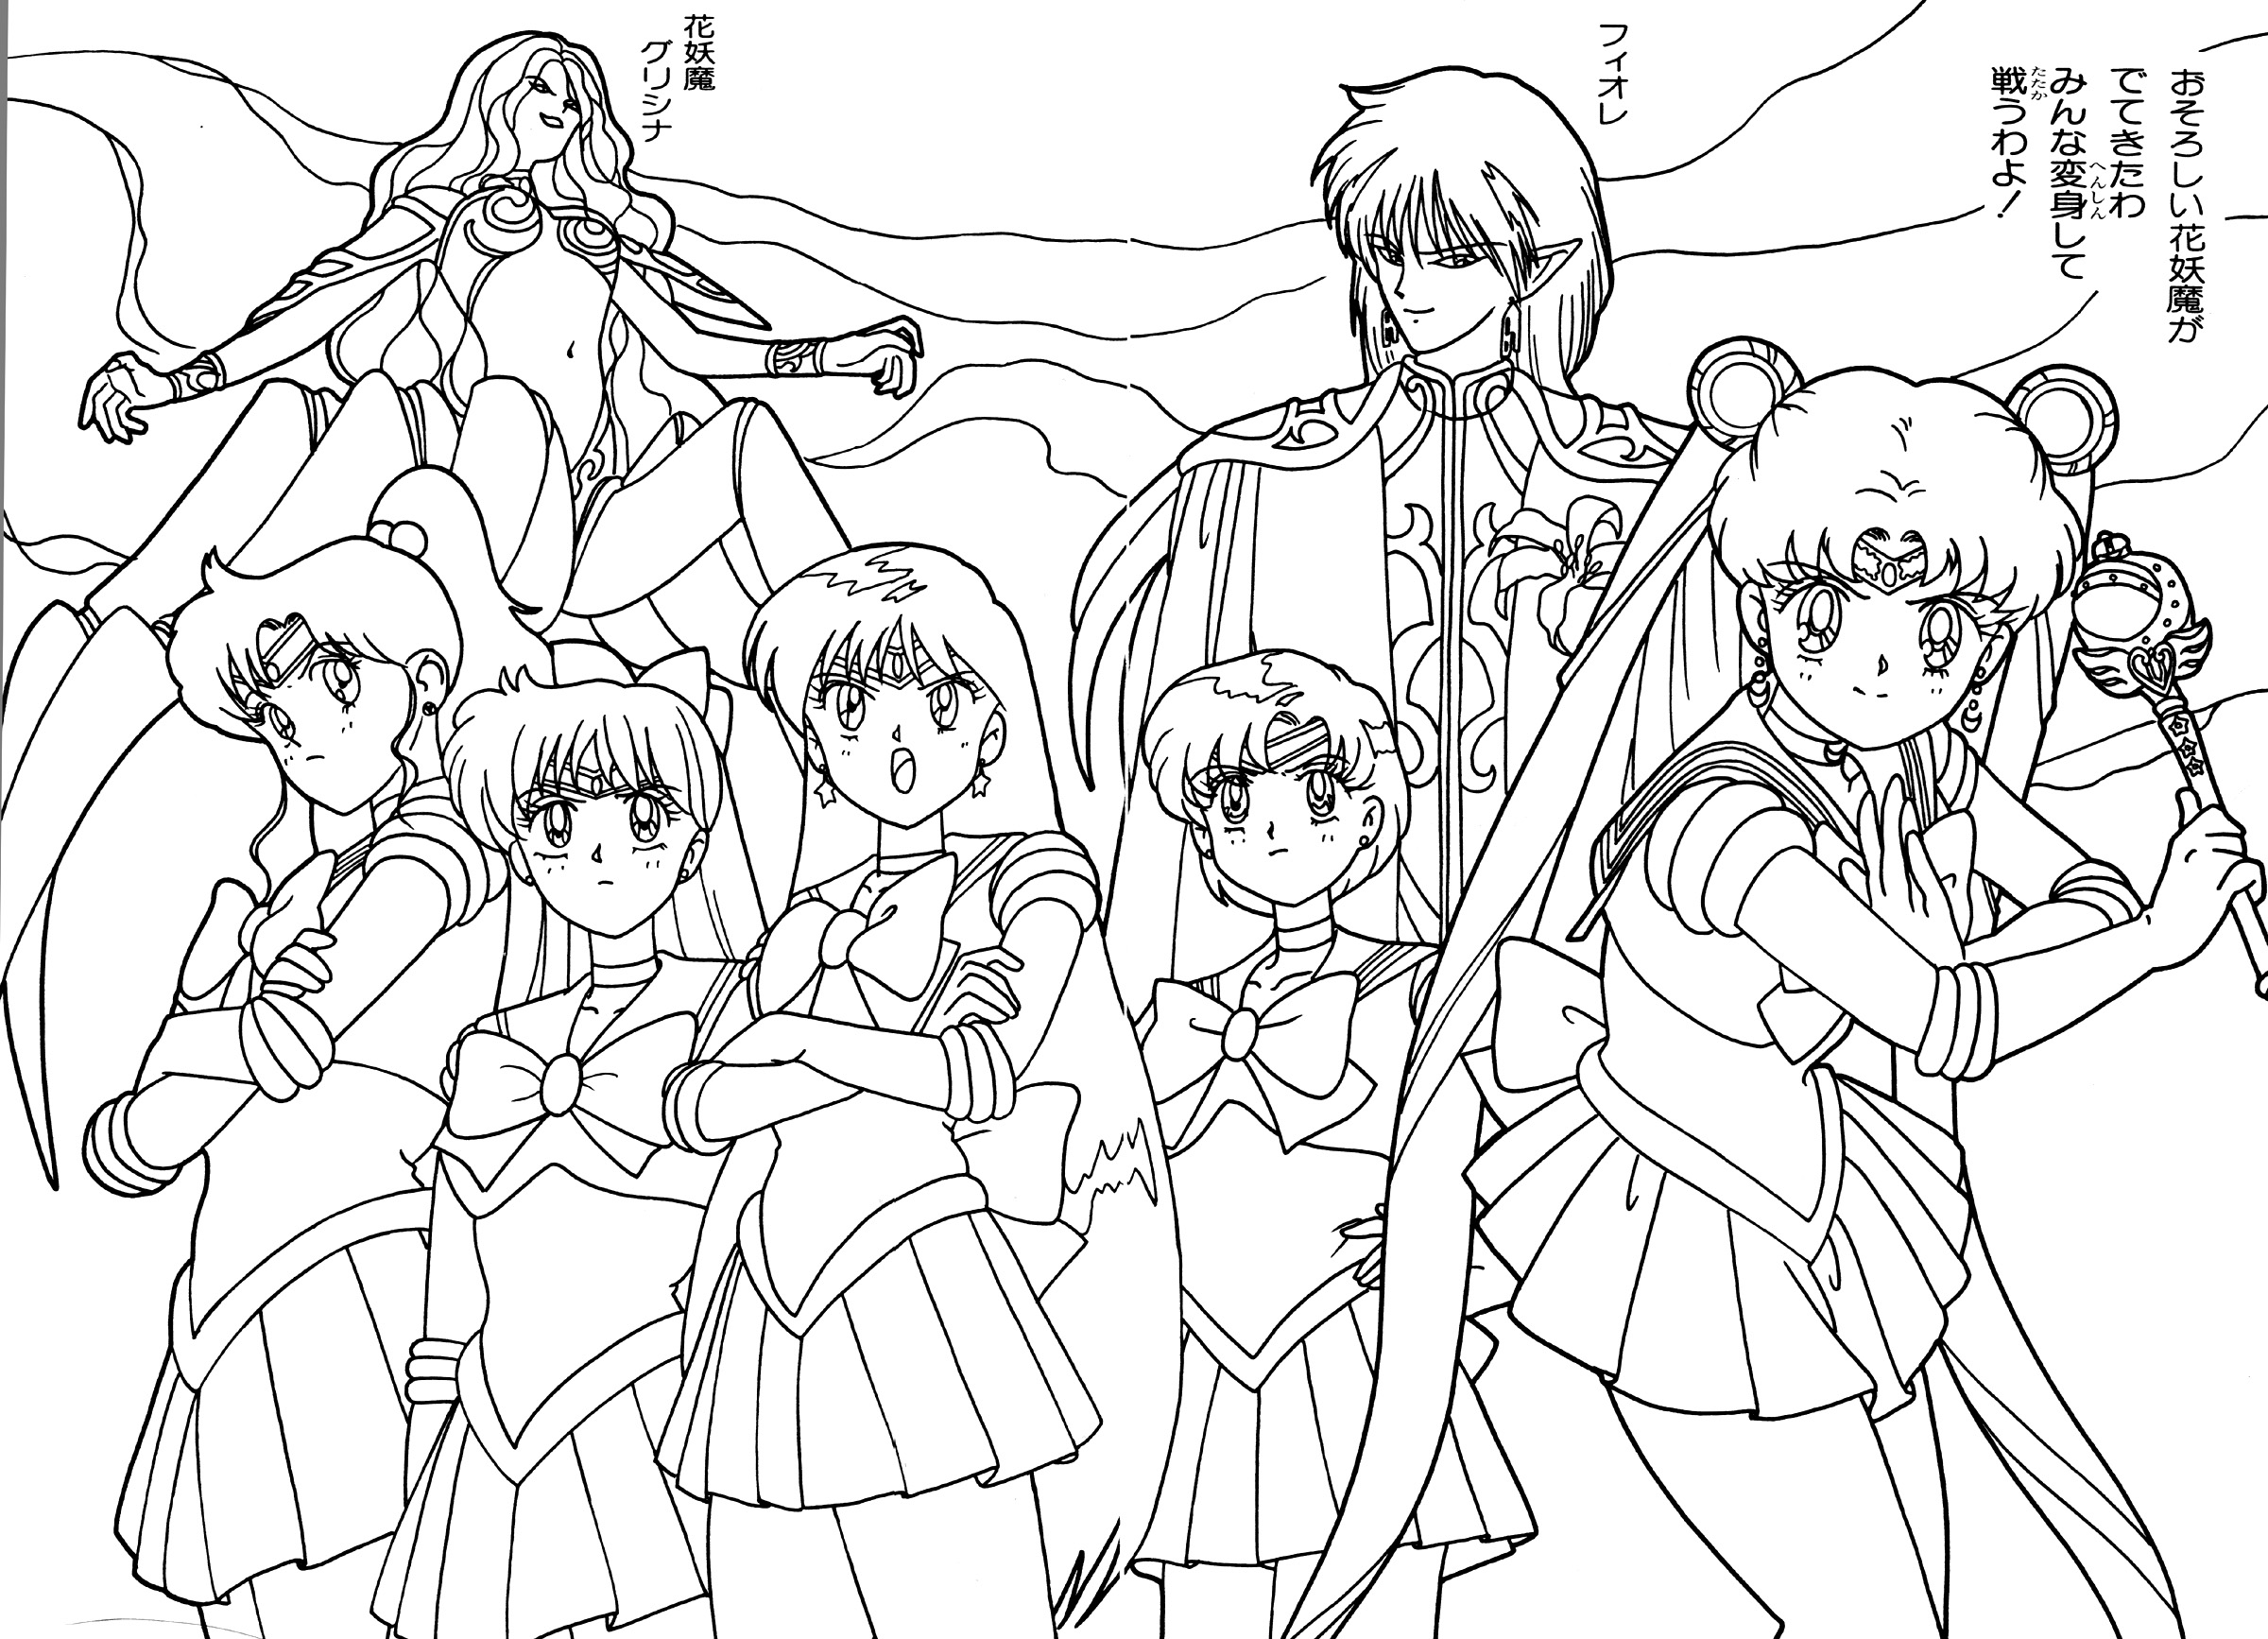 Here's the Best Website for Sailor Moon Coloring Book Pages